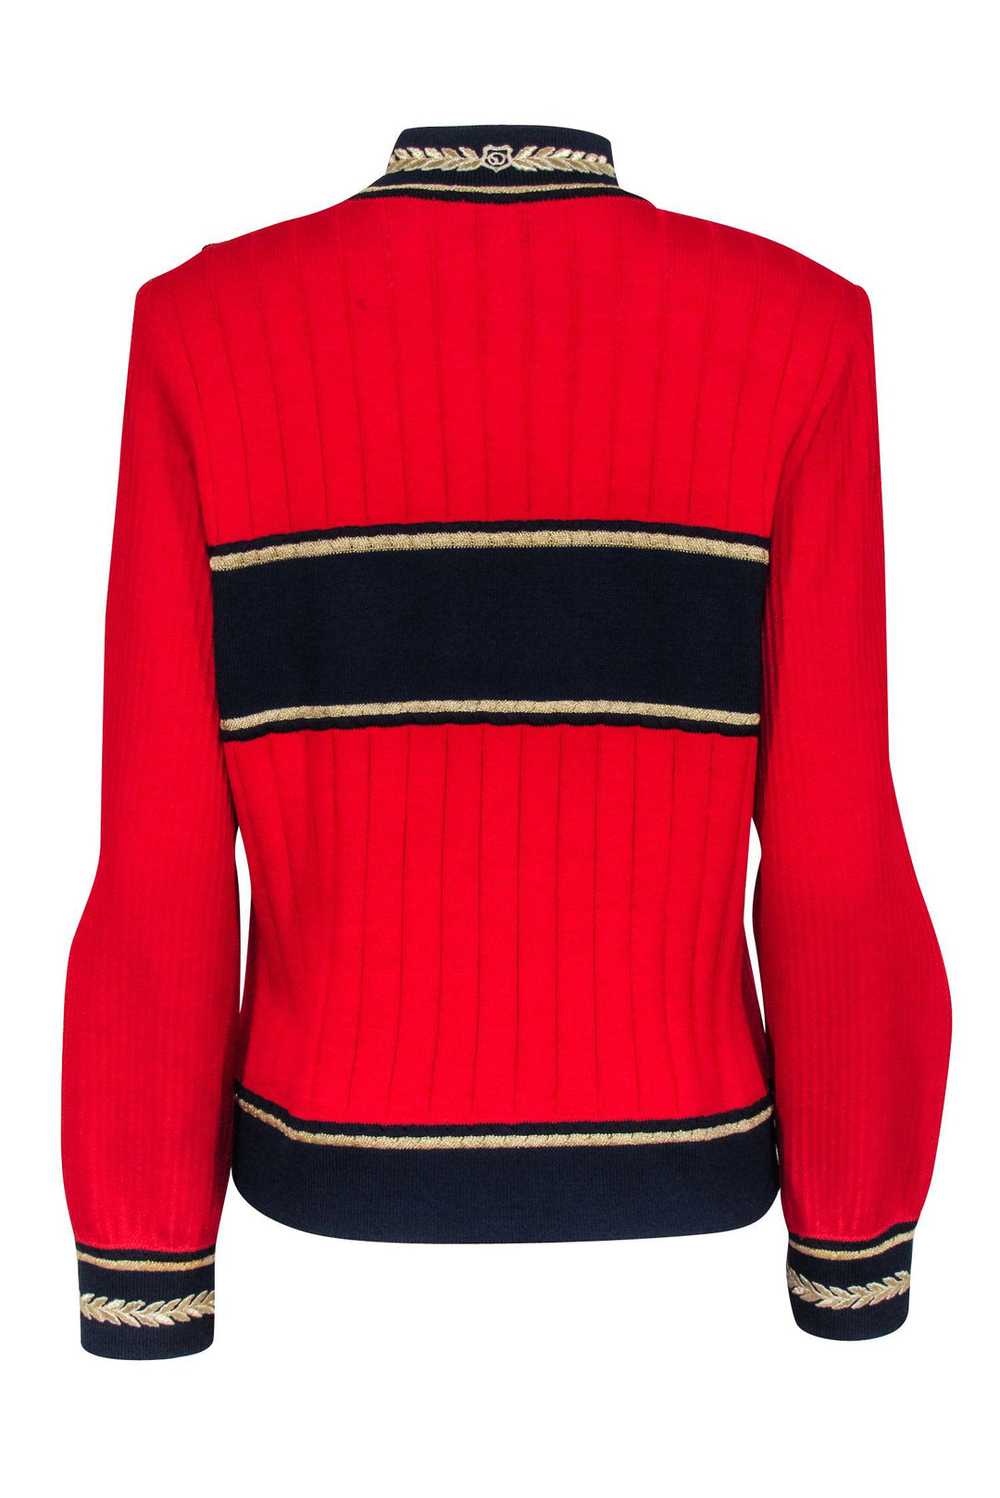 St. John - Red Knit Sweater w/ Gold & Navy Detail… - image 3